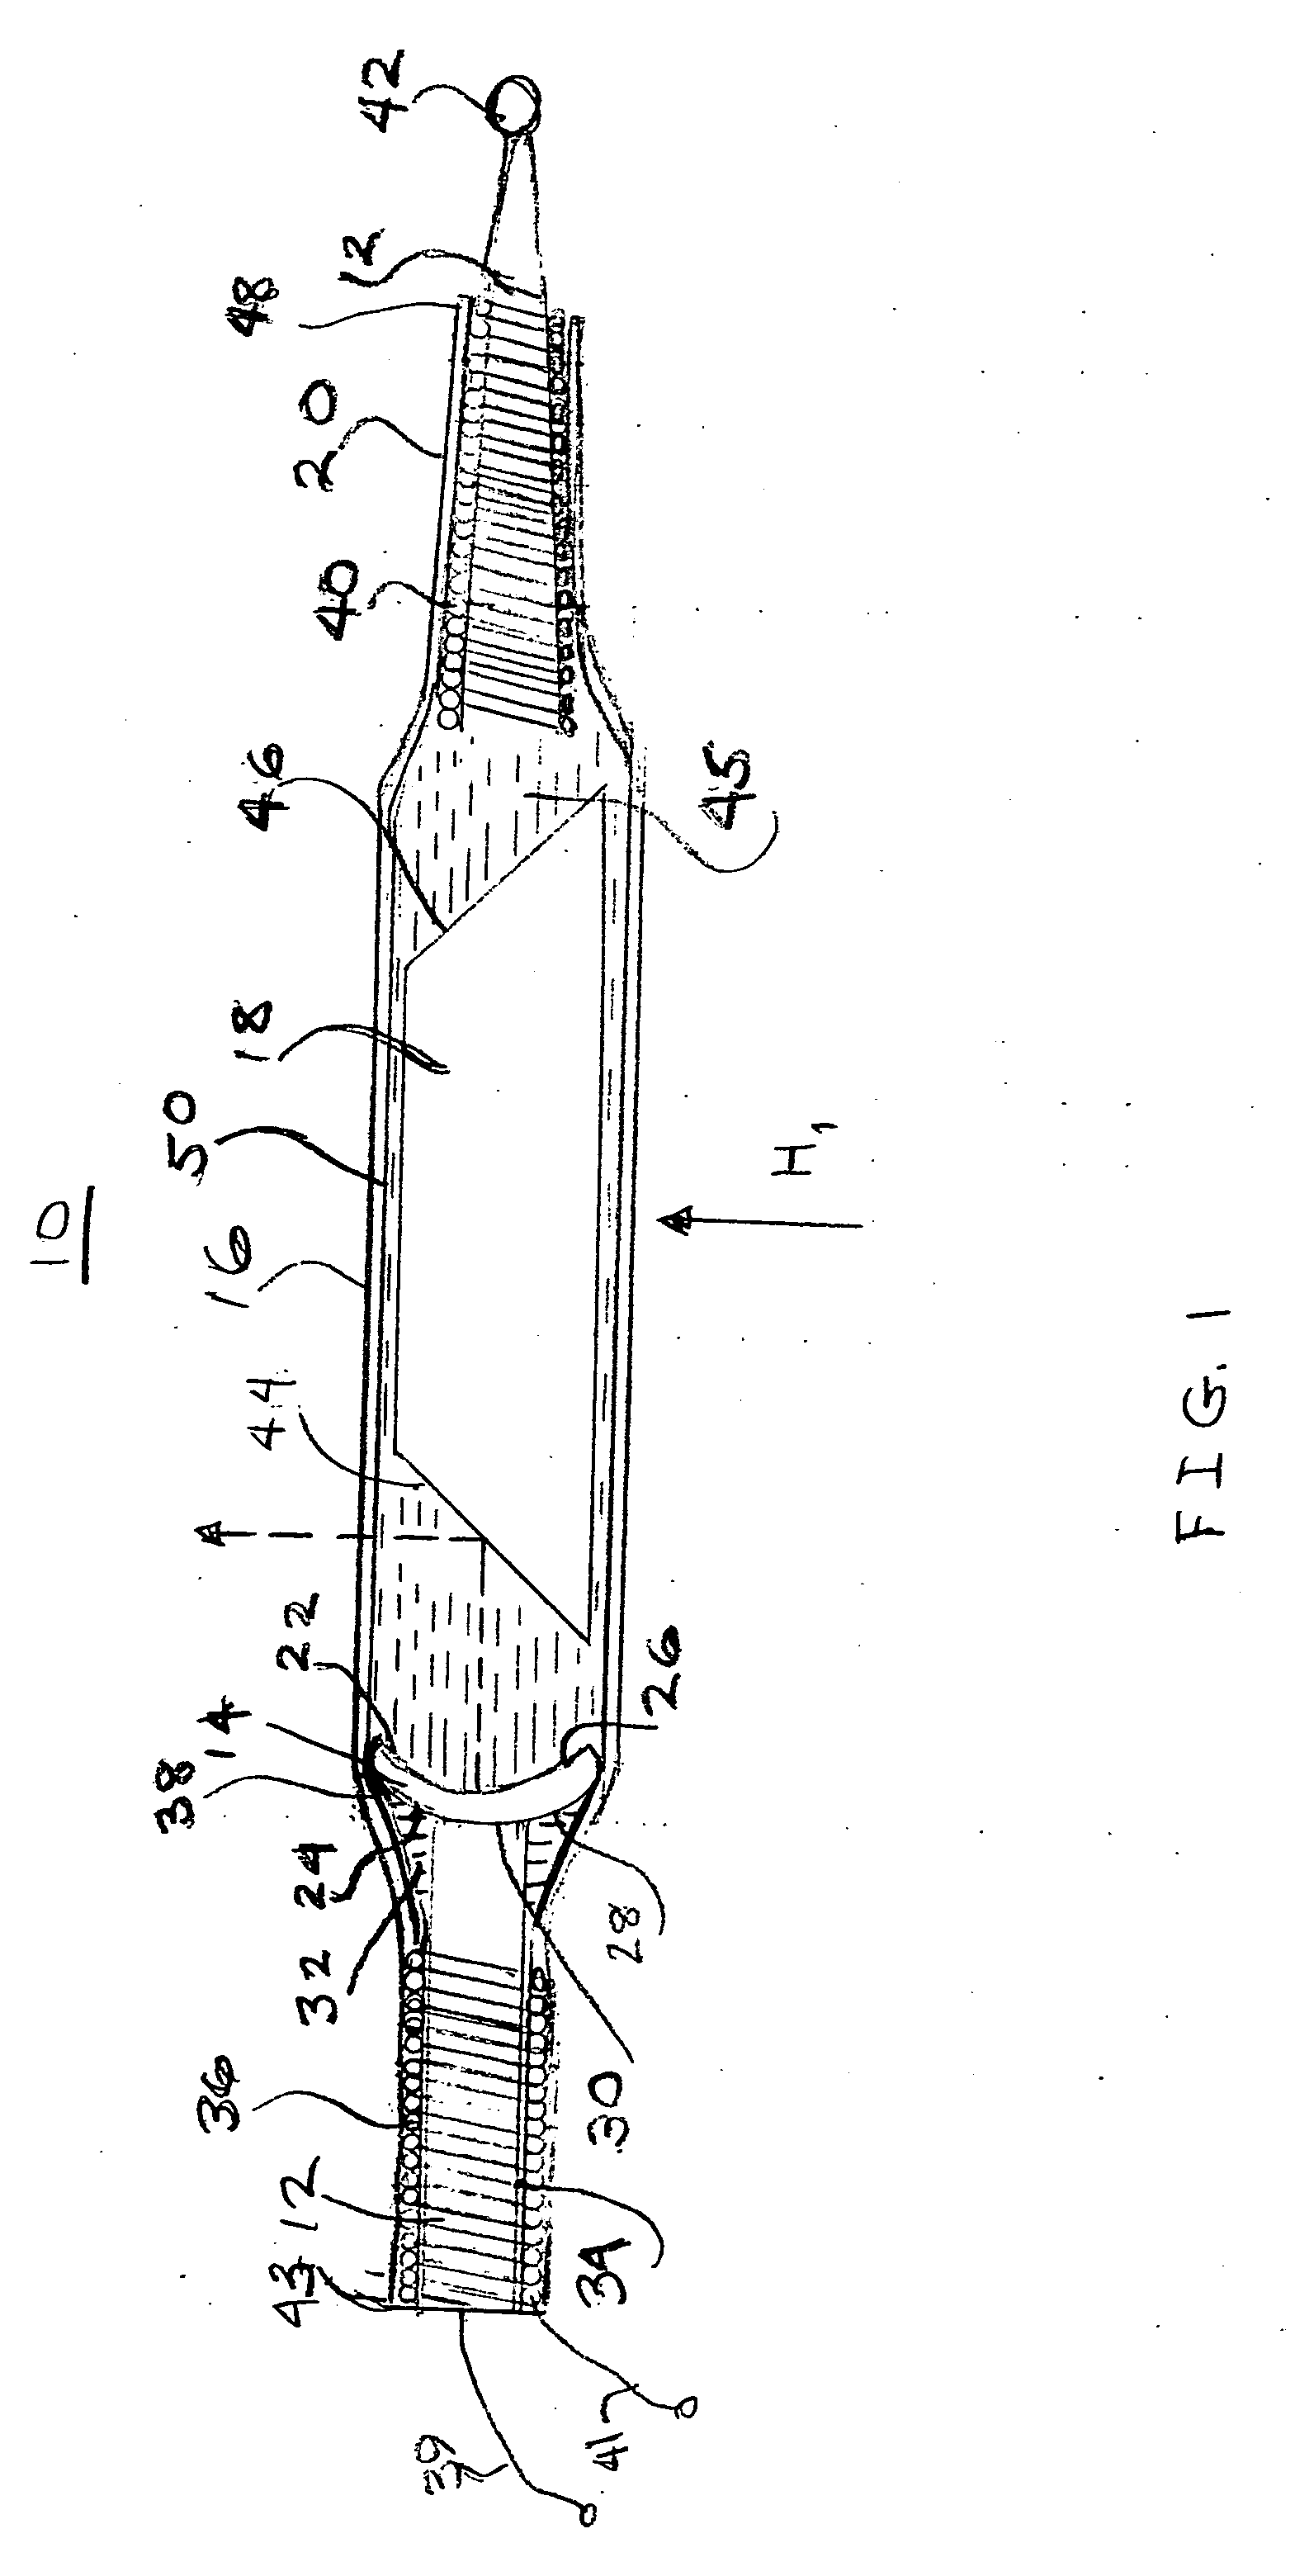 Apparatus and method for intravascular imaging